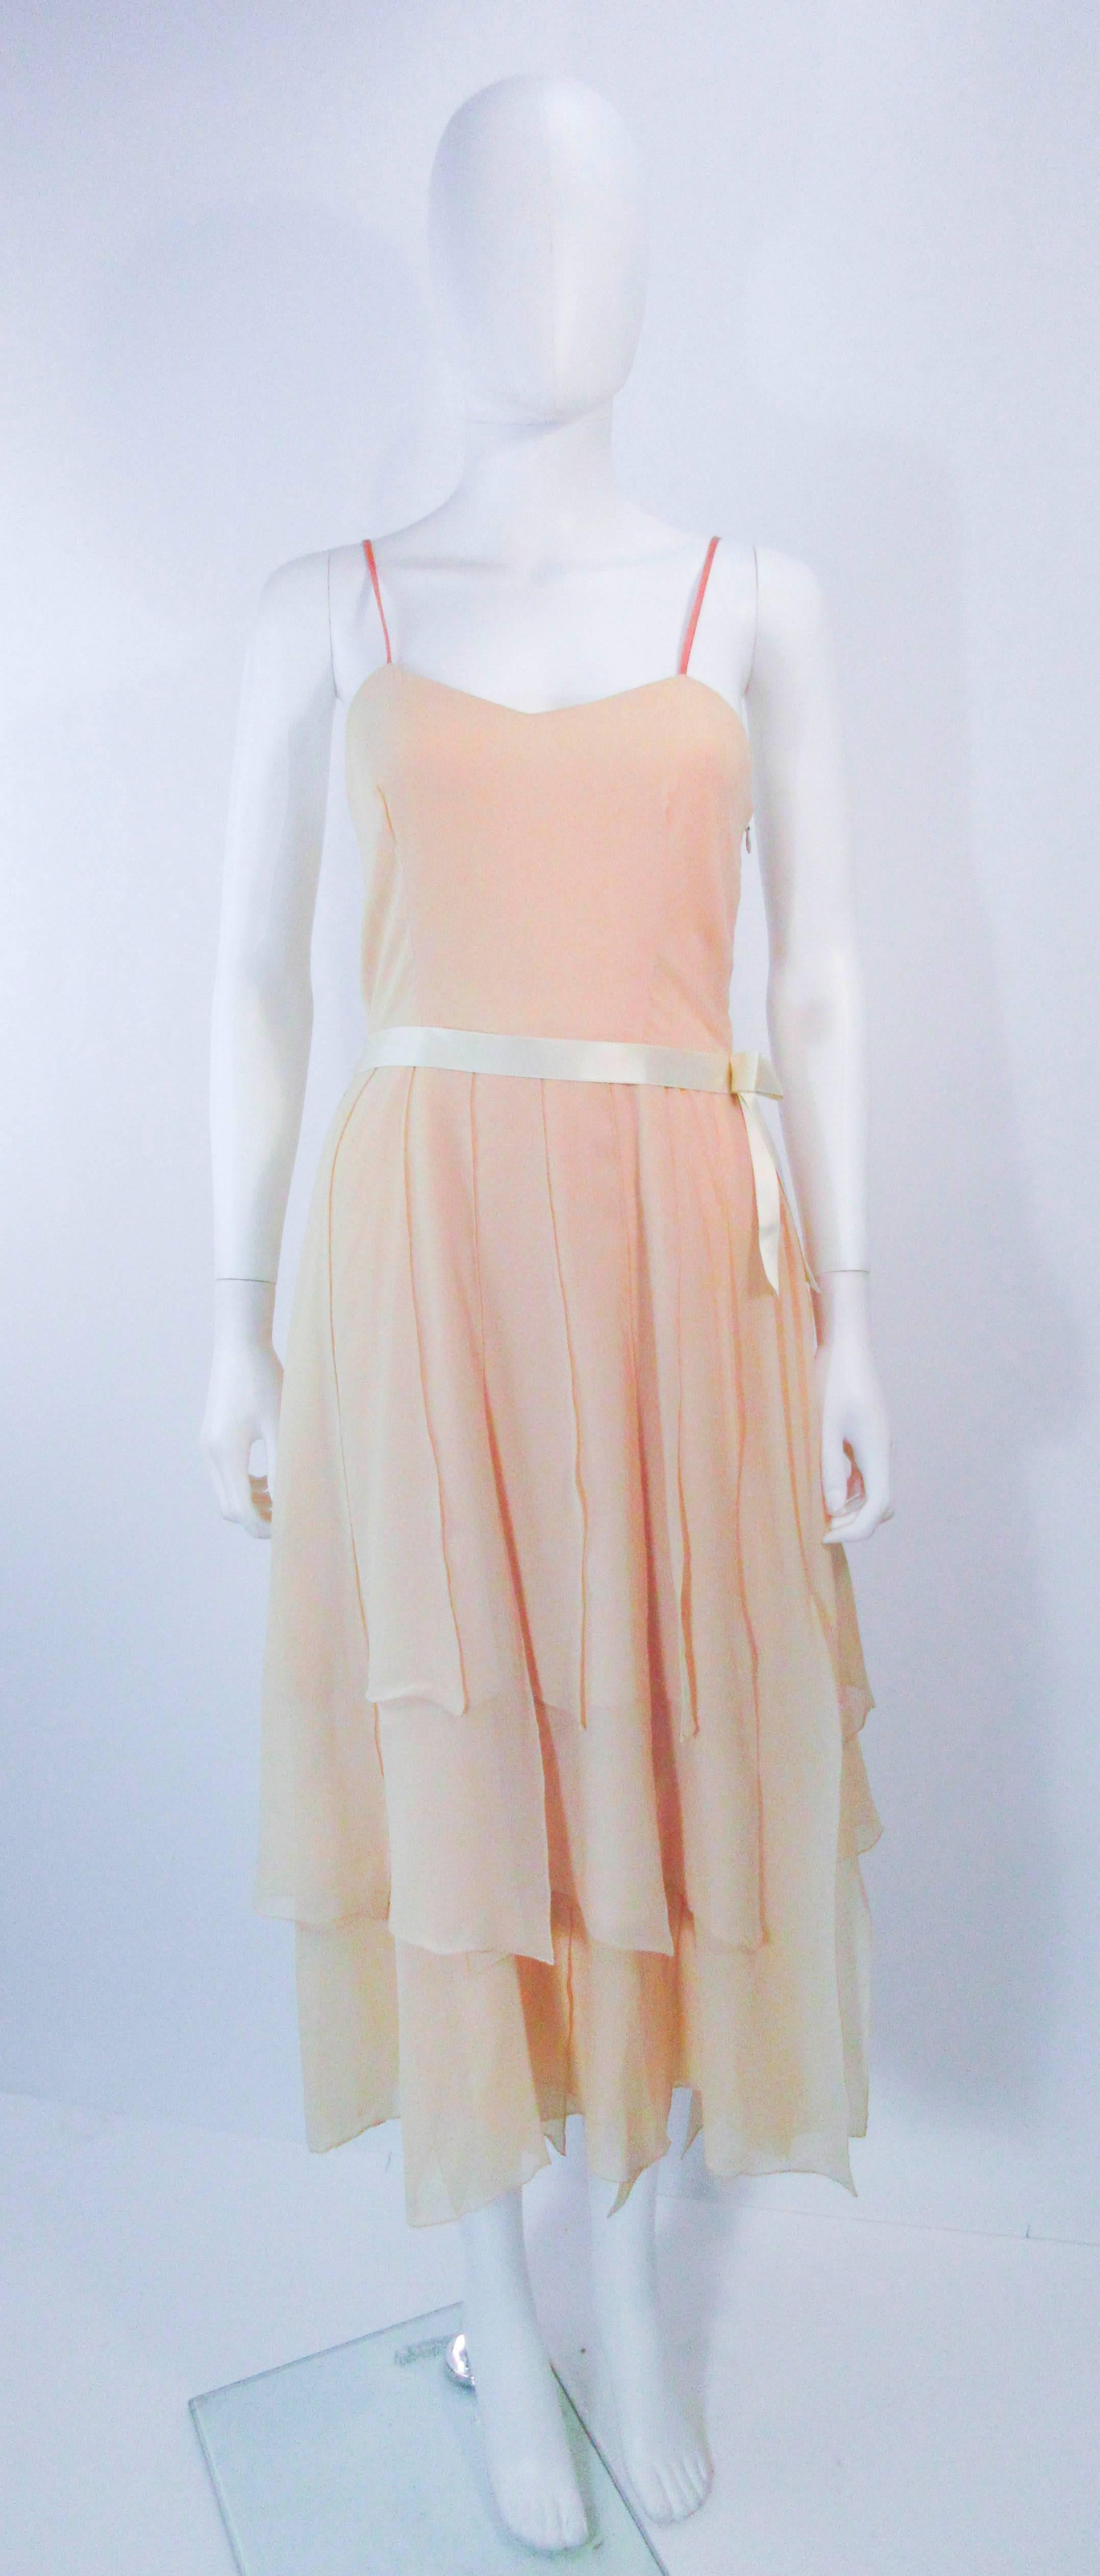 MAGGY REEVES Nude Silk Chiffon 2pc Gown Ensemble with Sequins & Beading Size 4  For Sale 1